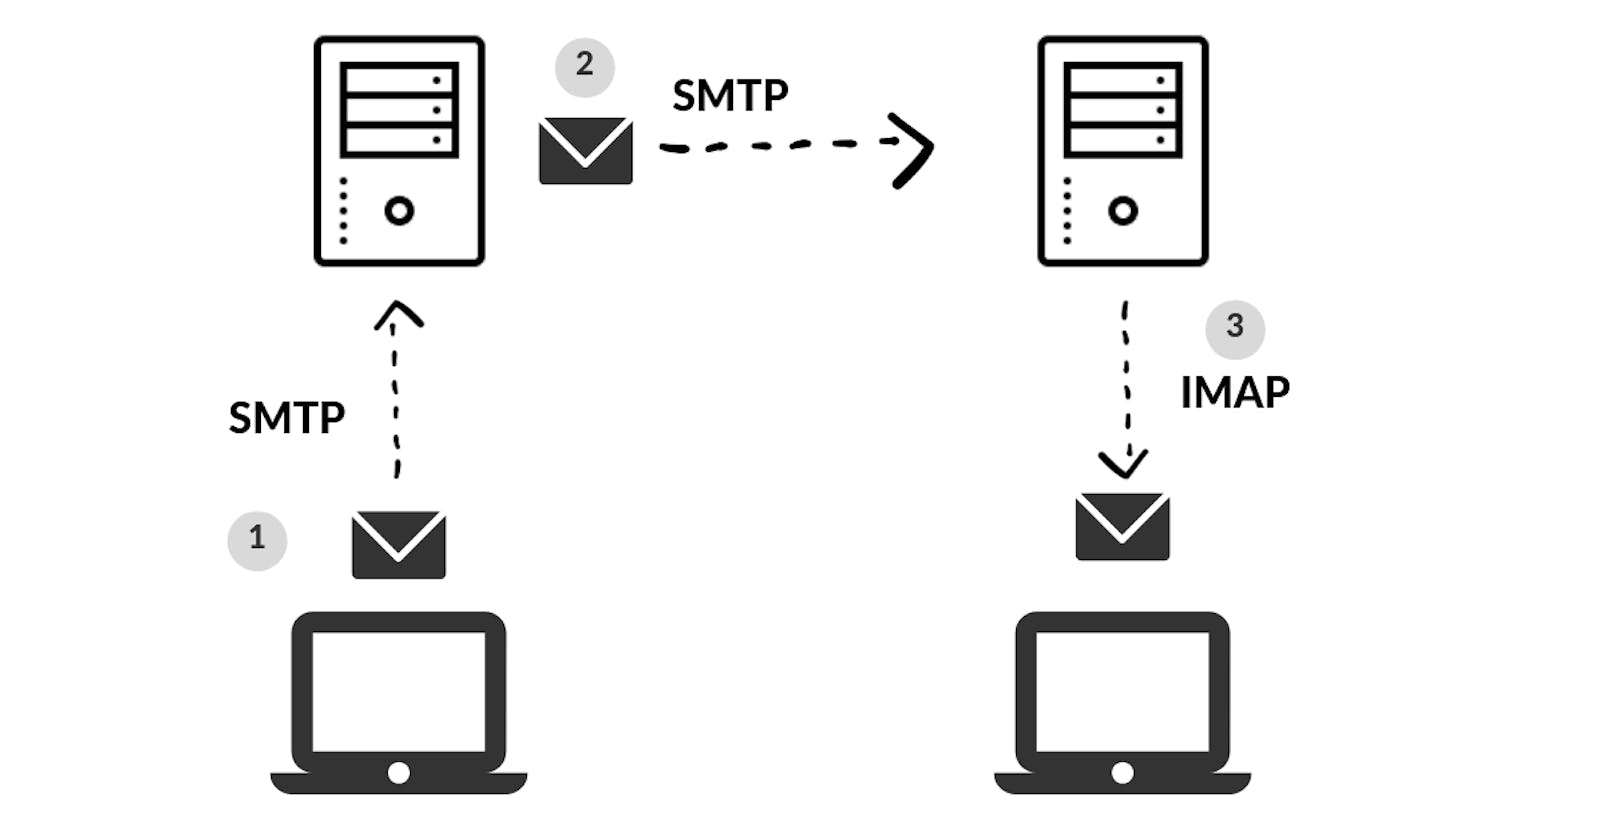 Send and reply to an email using SMTP